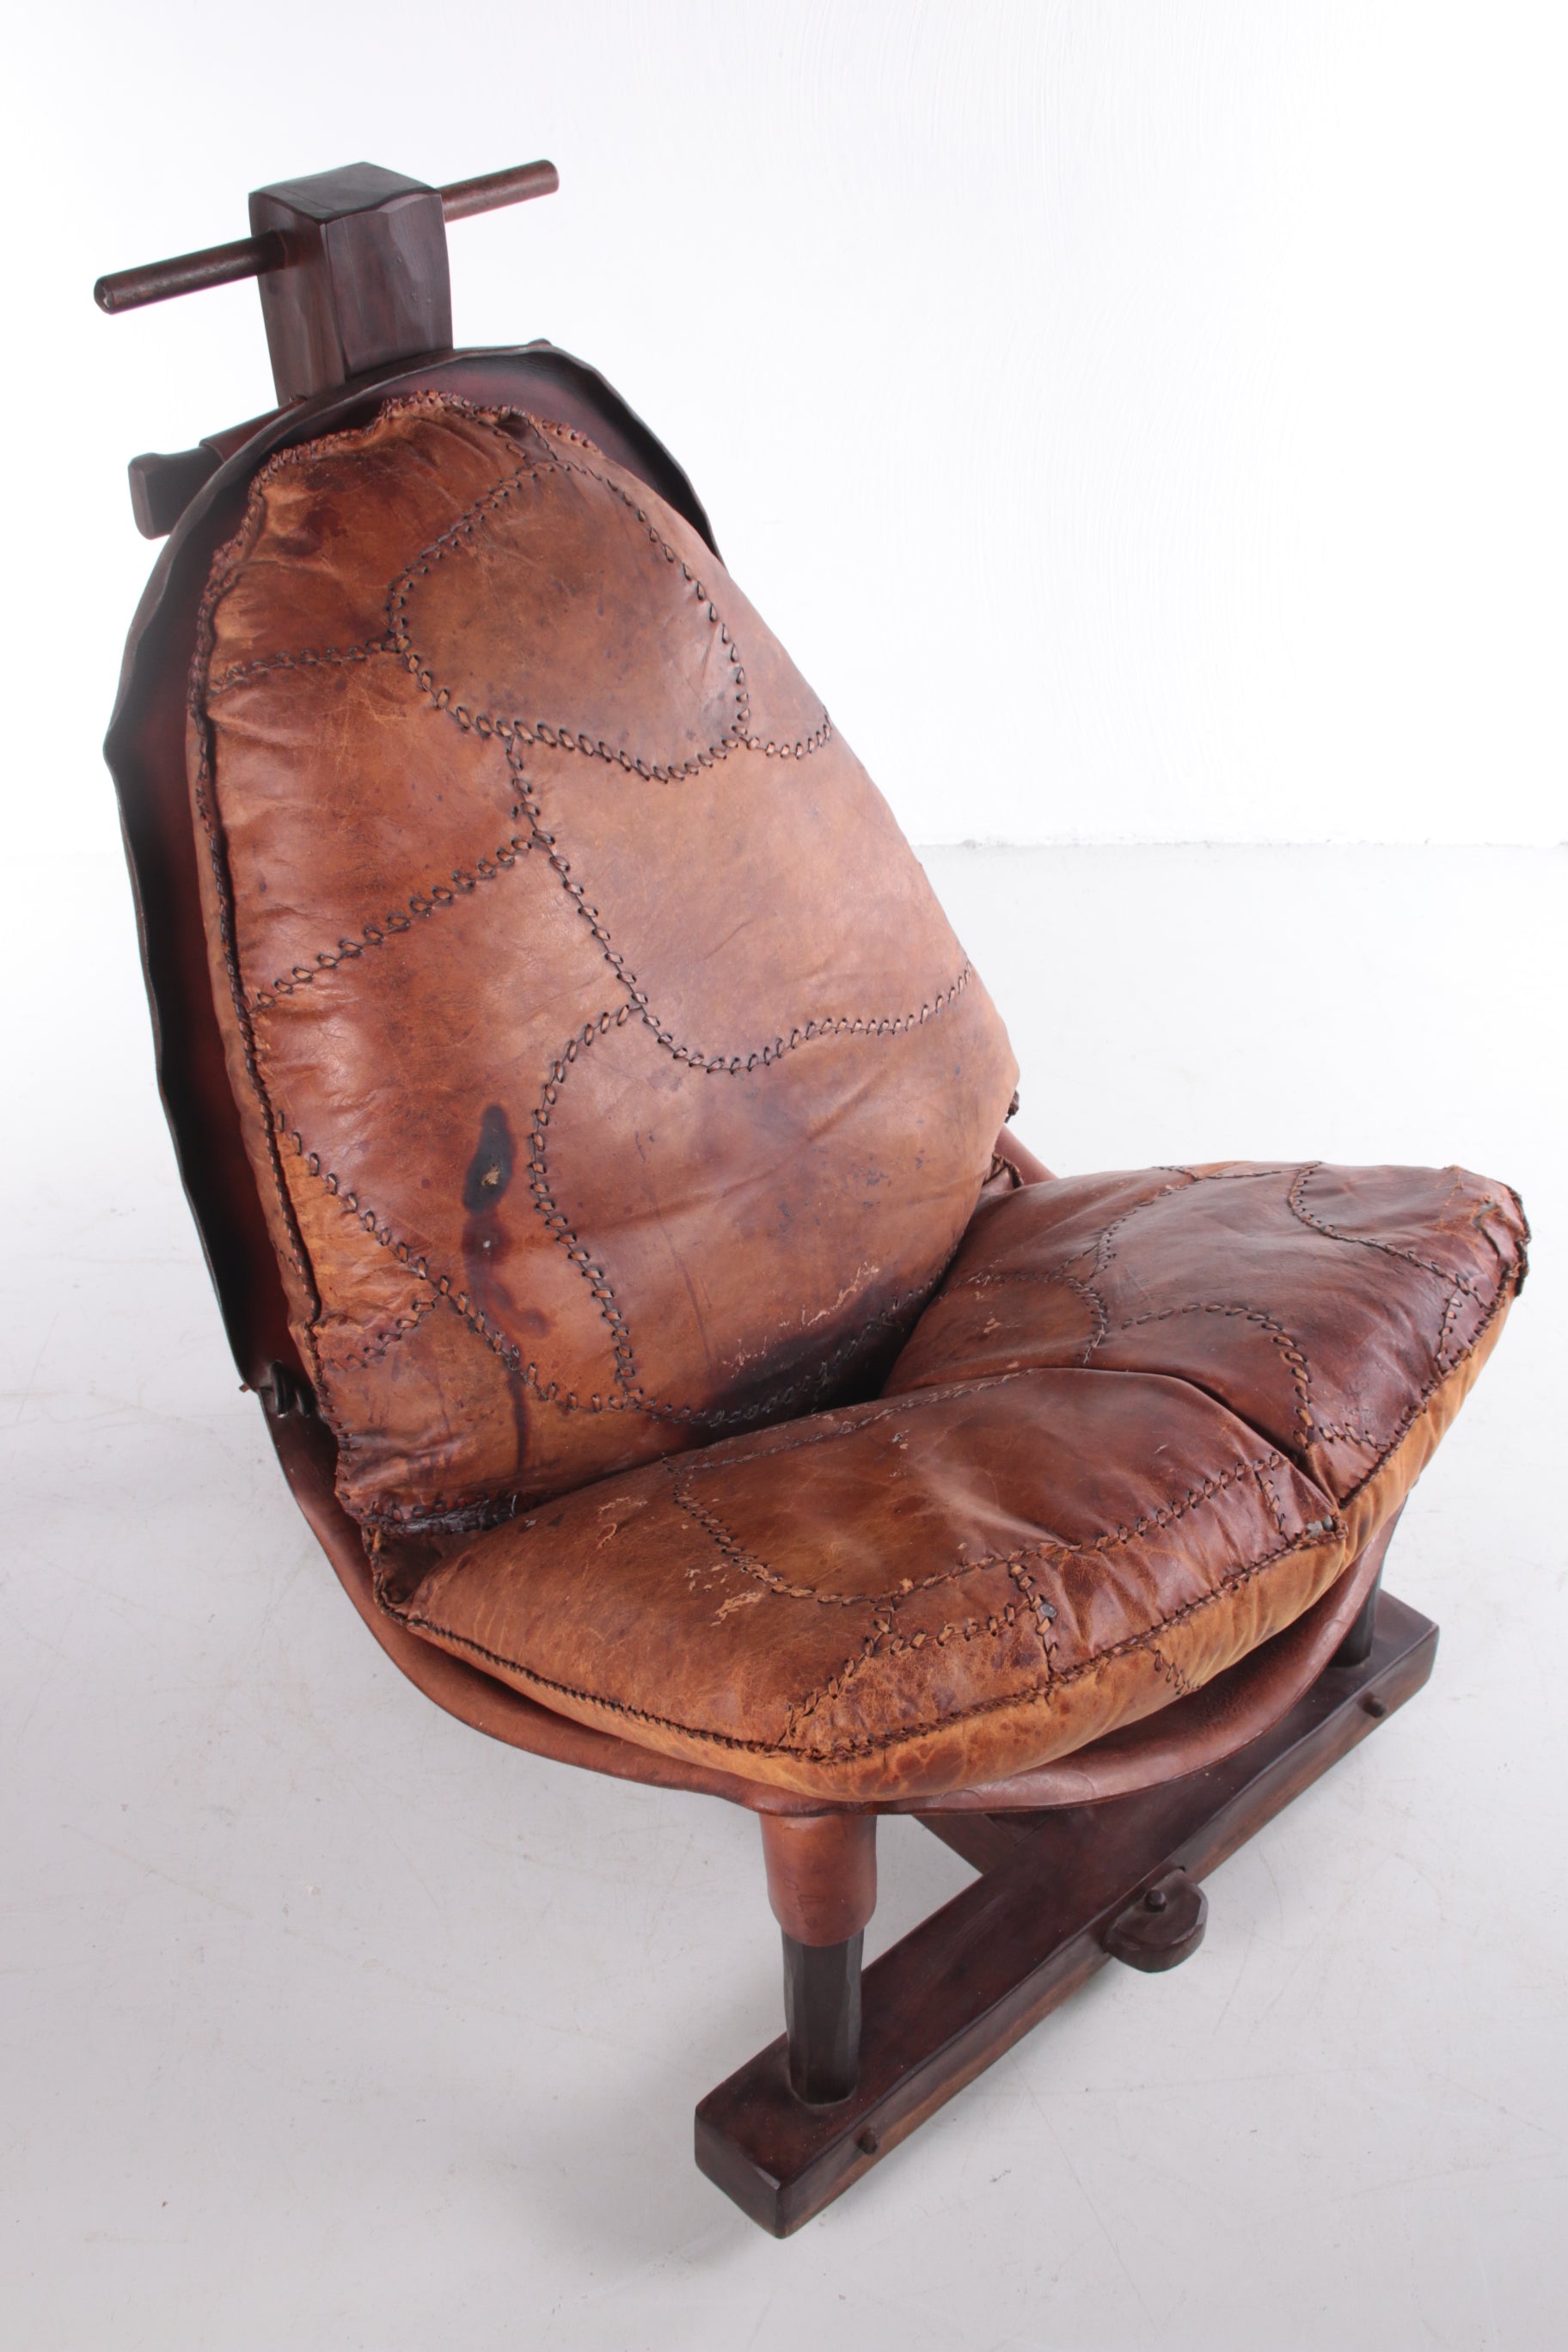 Brazilian Patched Leather Lounge Chair,1960s bovenkant